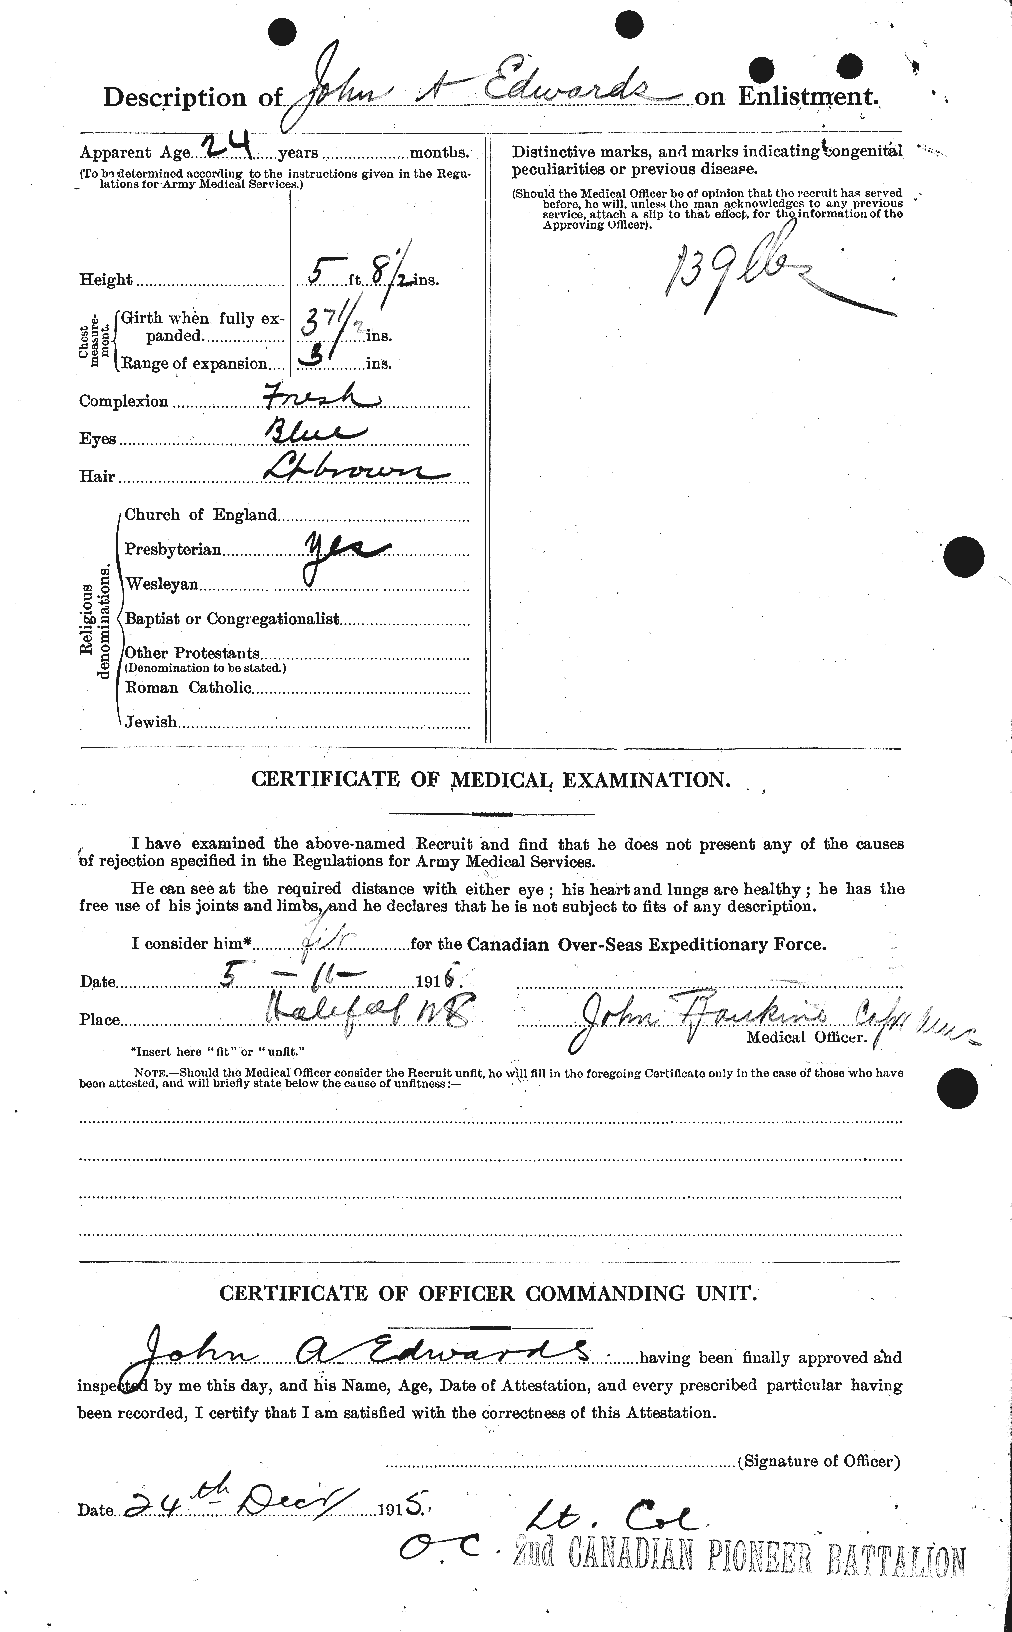 Personnel Records of the First World War - CEF 310120b